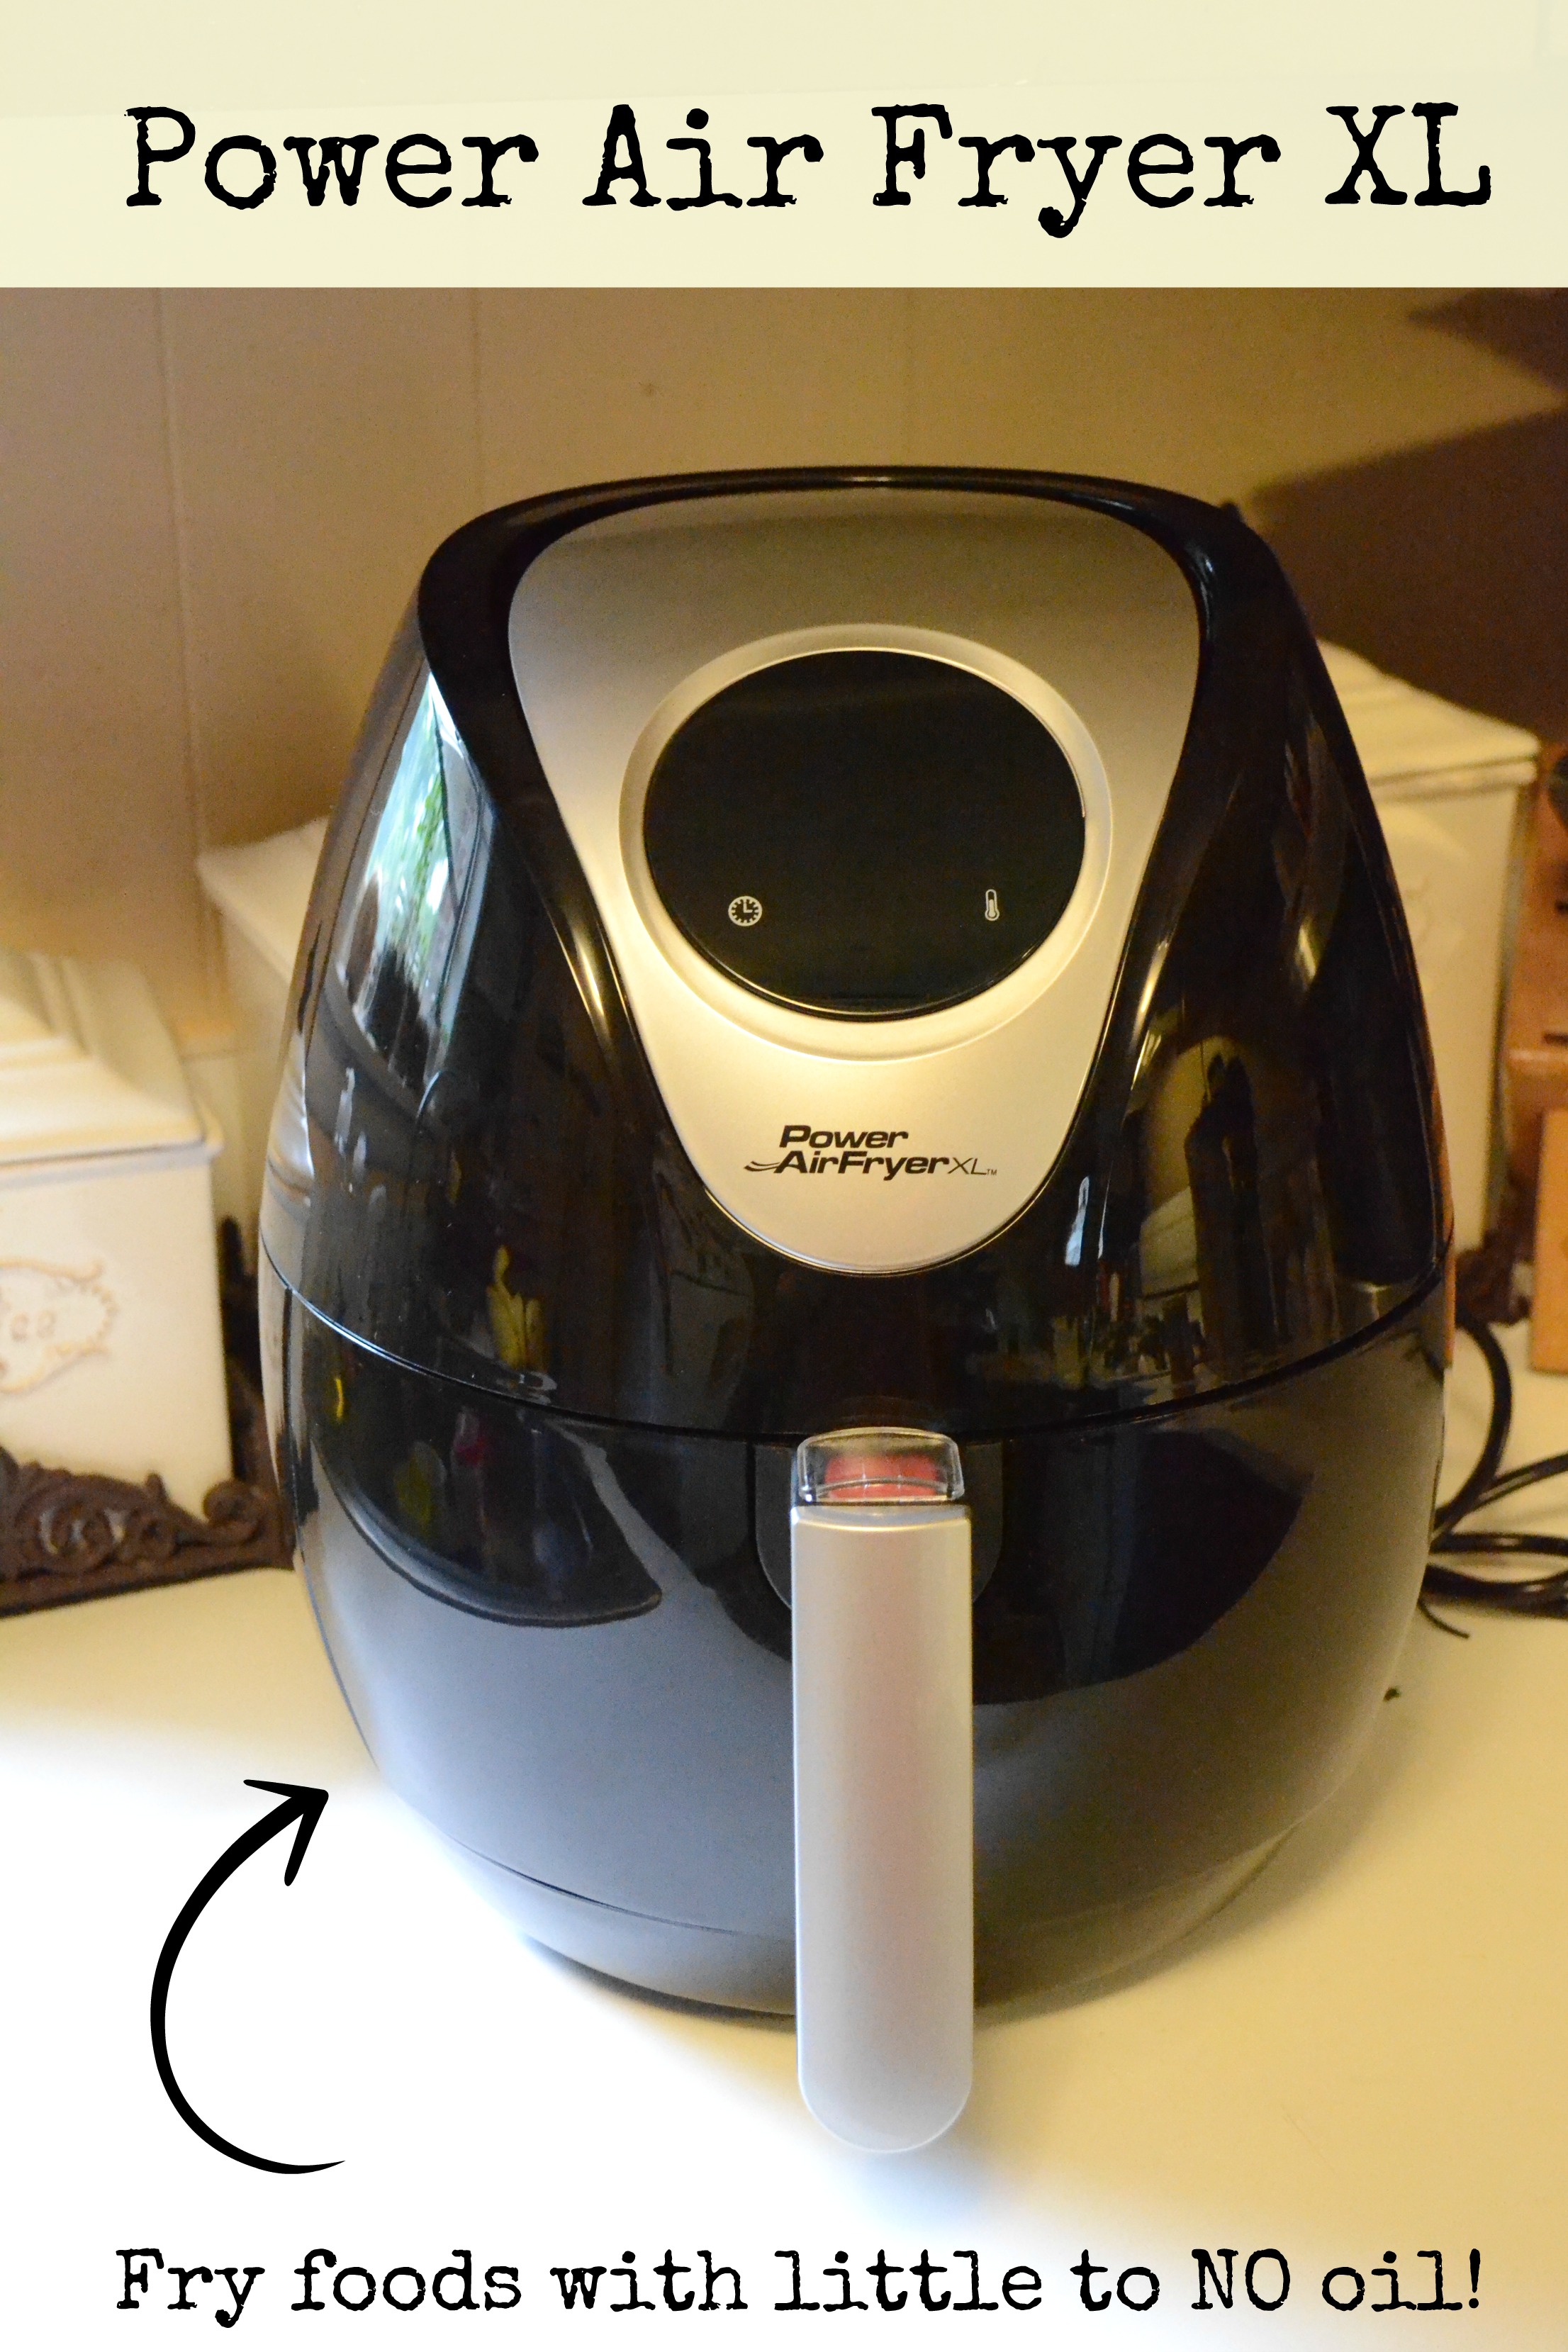 Southern Fried Chicken - Power Air Fryer XL Review